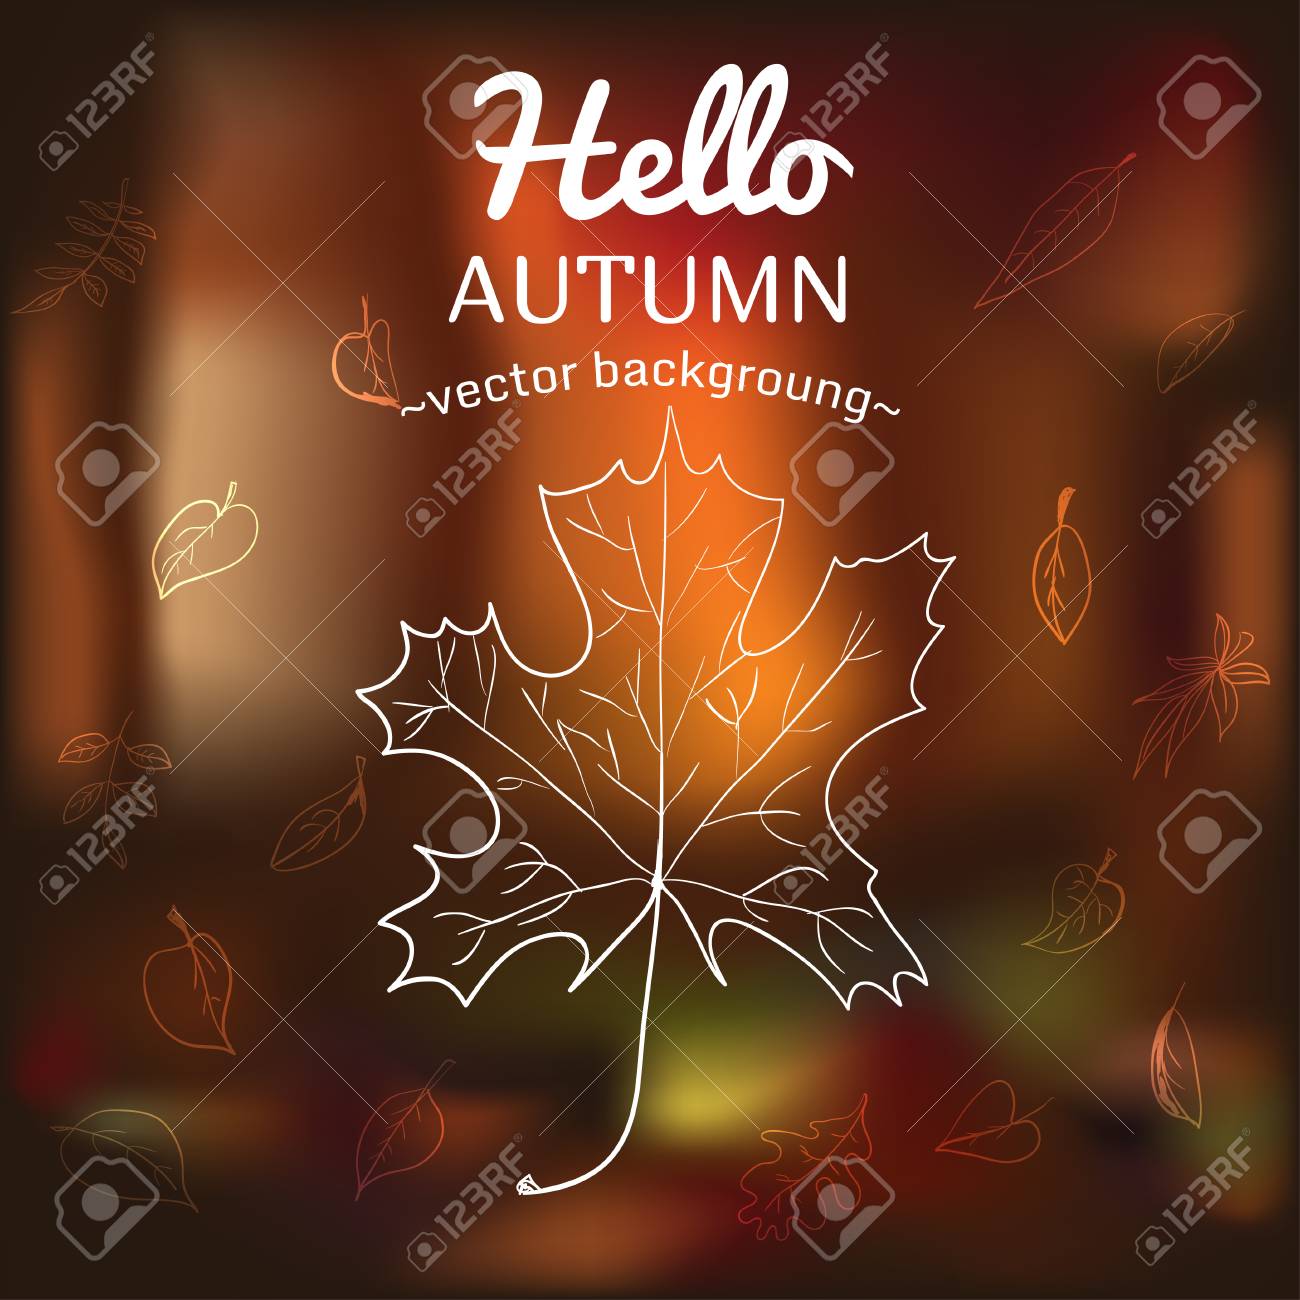 Card With Autumn Symbols Scattered On The Background Of Vague